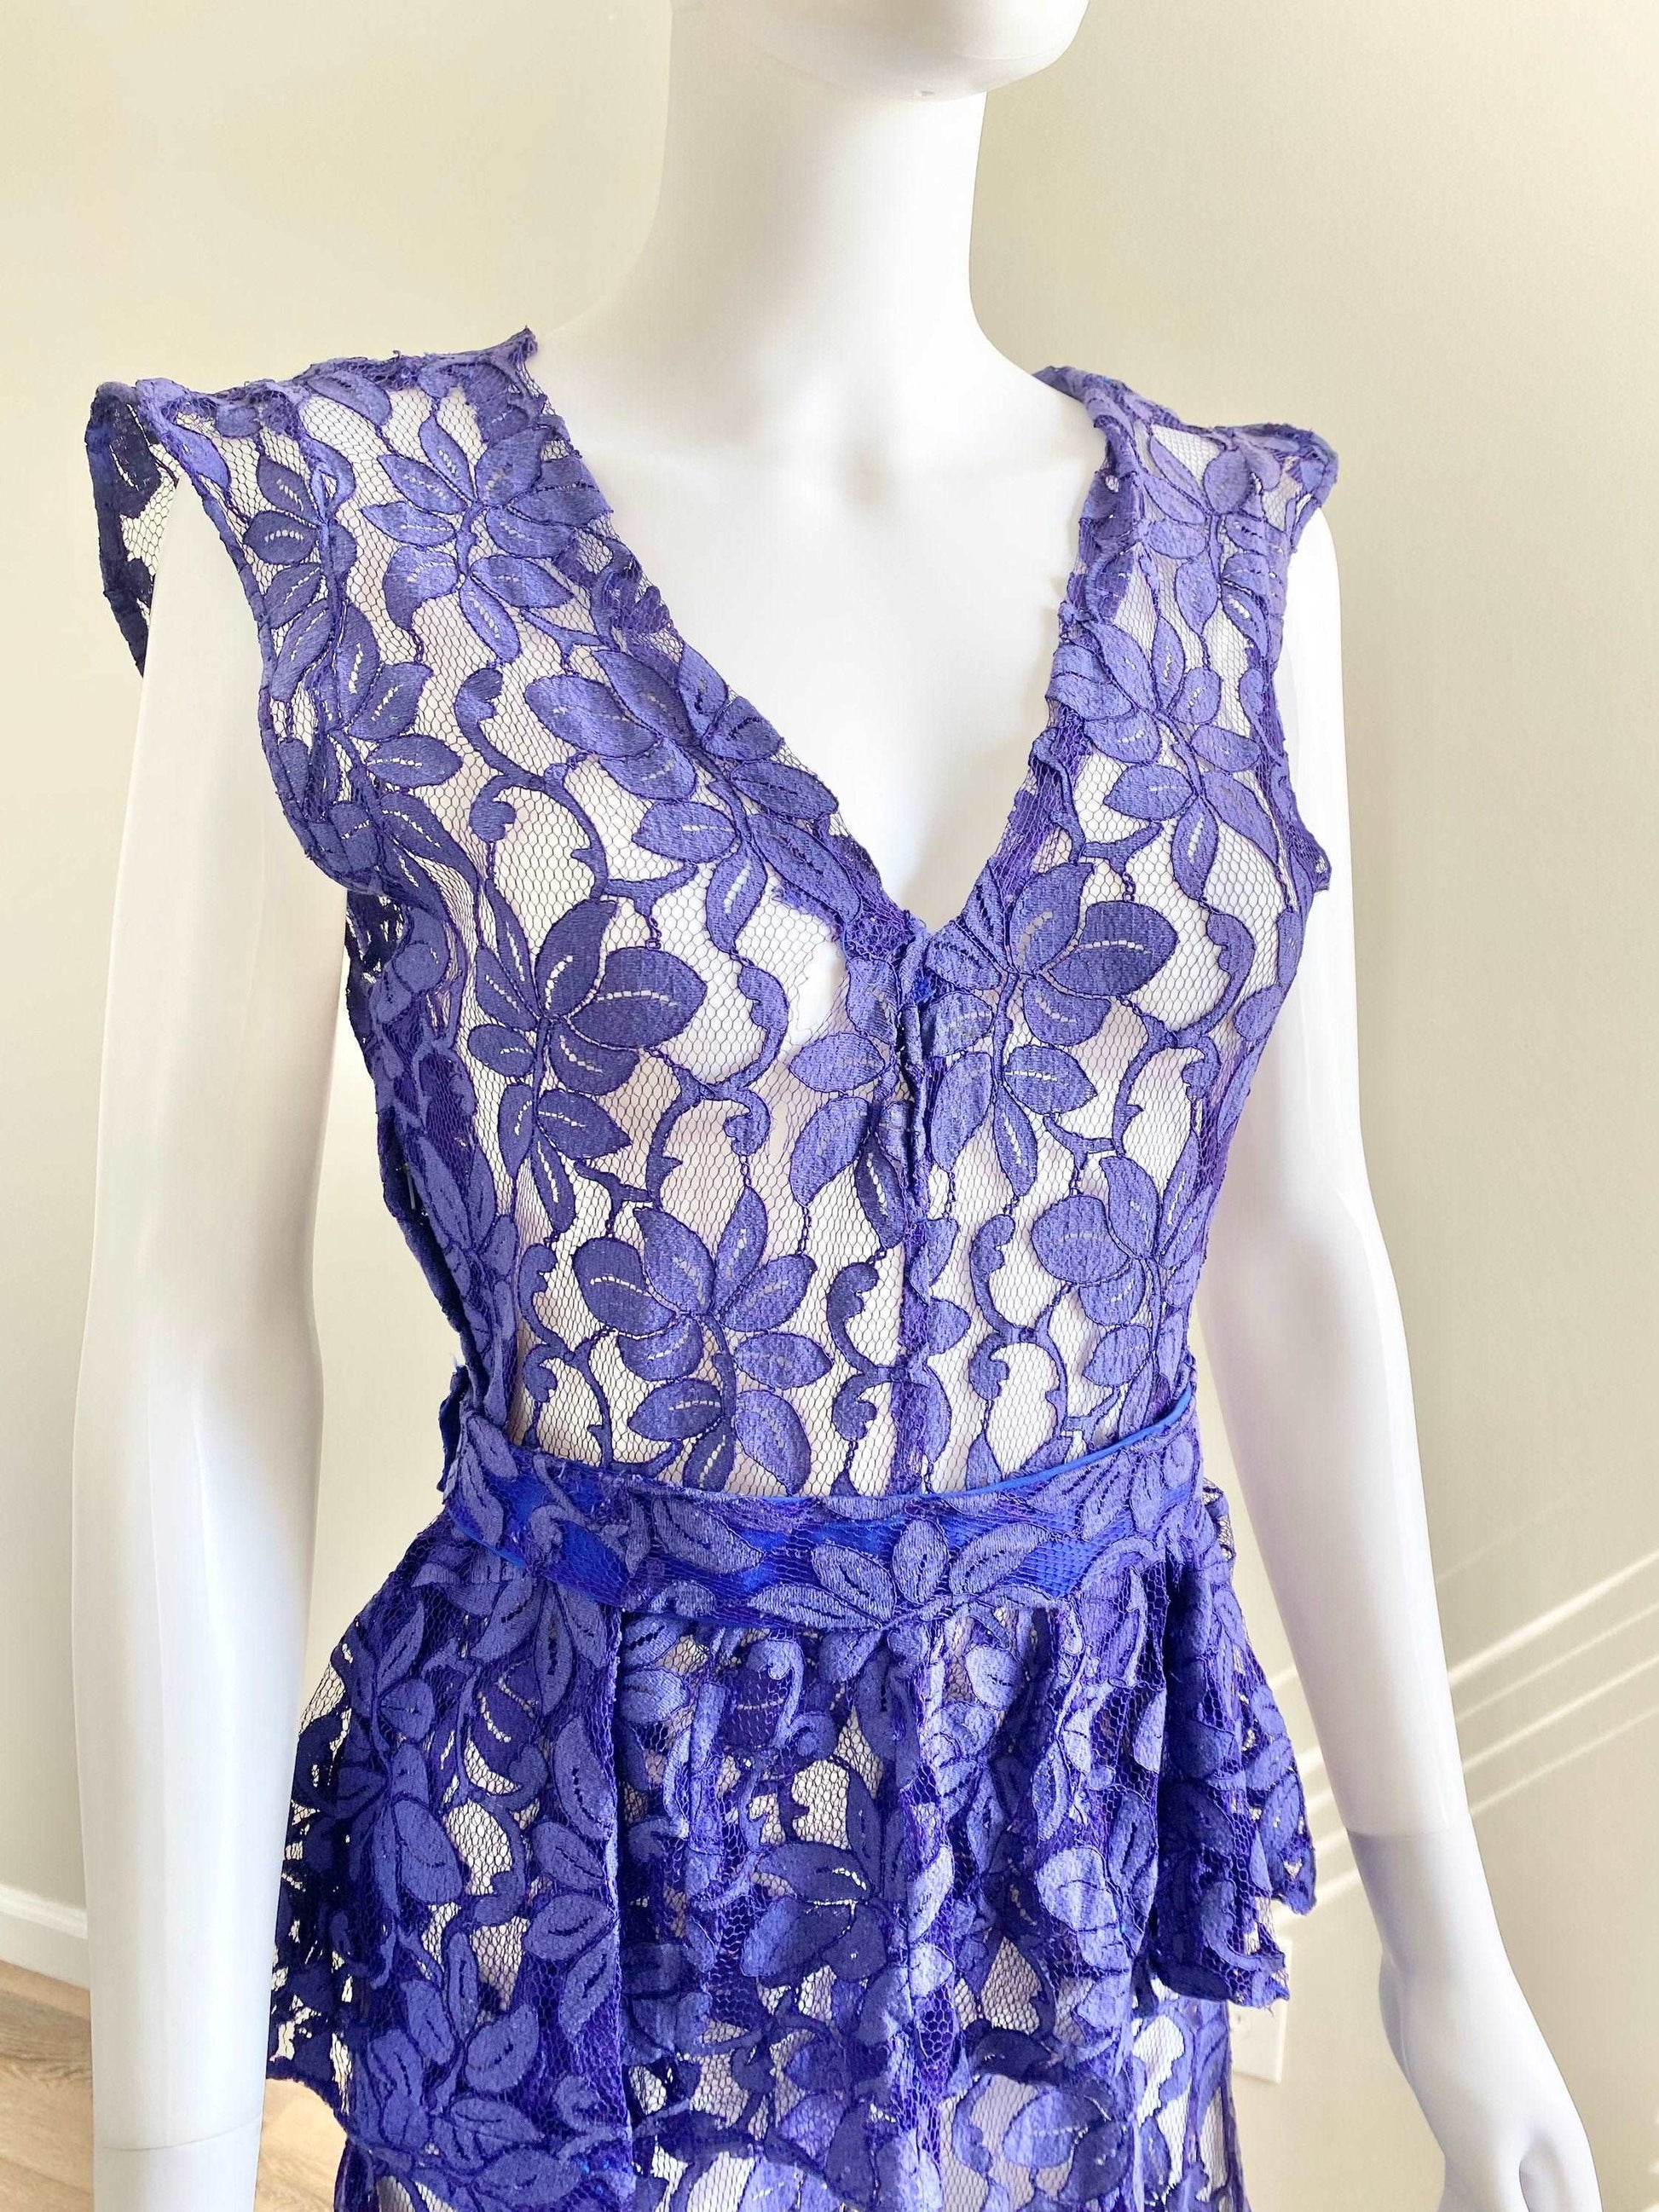 Vintage 1930s Lace Purple Formal Dress / 30s A line sleeveless mermaid style evening gown wedding leaf print Size M